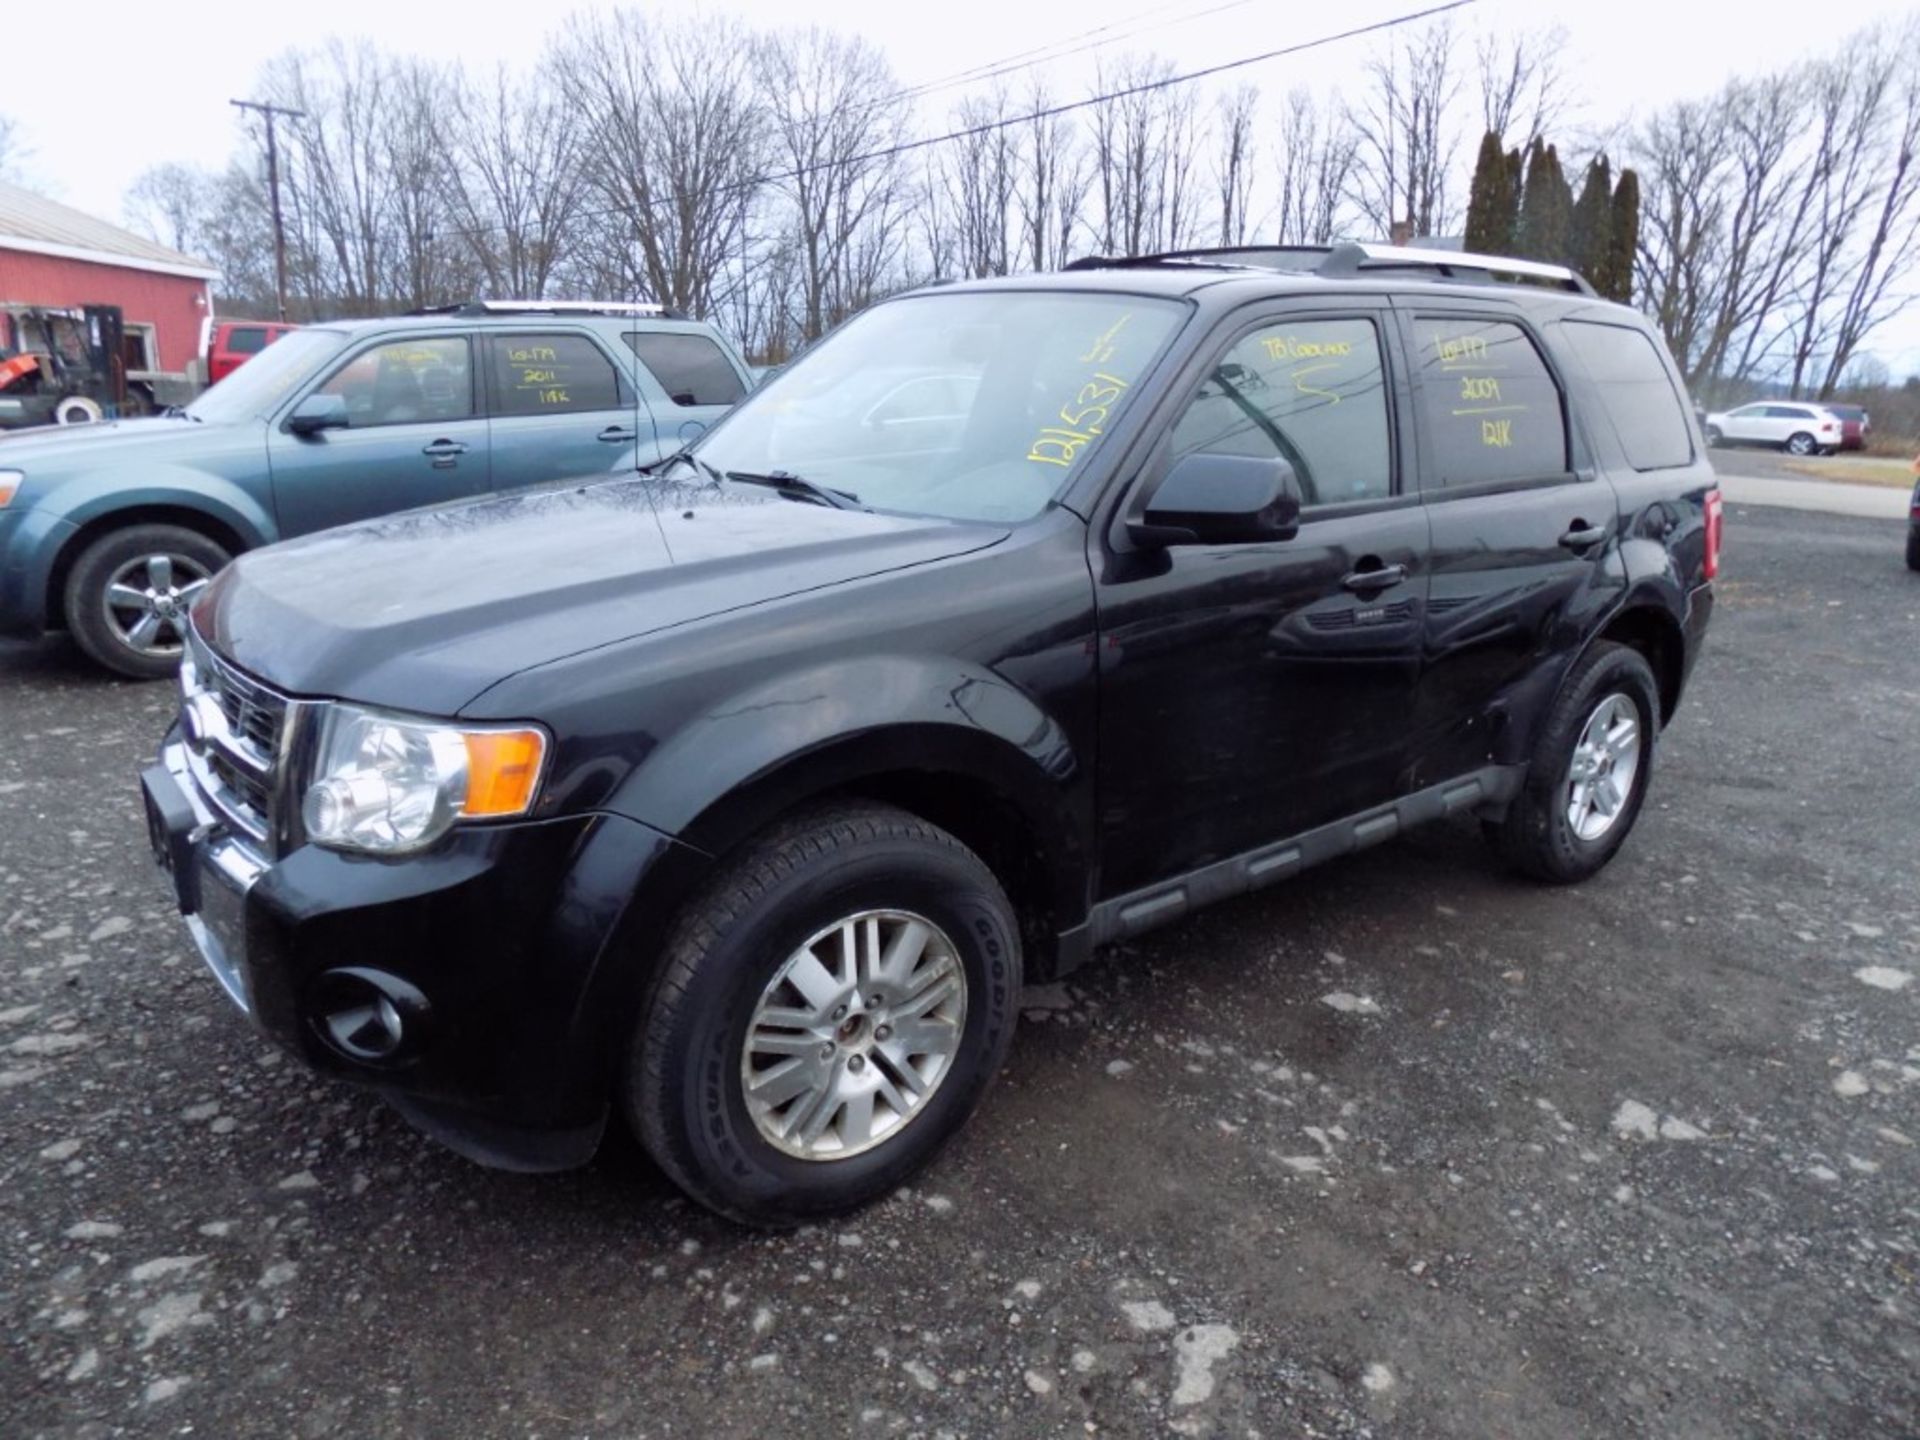 2009 Ford Escape Limited, 4x4, Black, Leather, Sunroof, 121,531 Miles, VIN#: 1FMCU94G09KC66421,